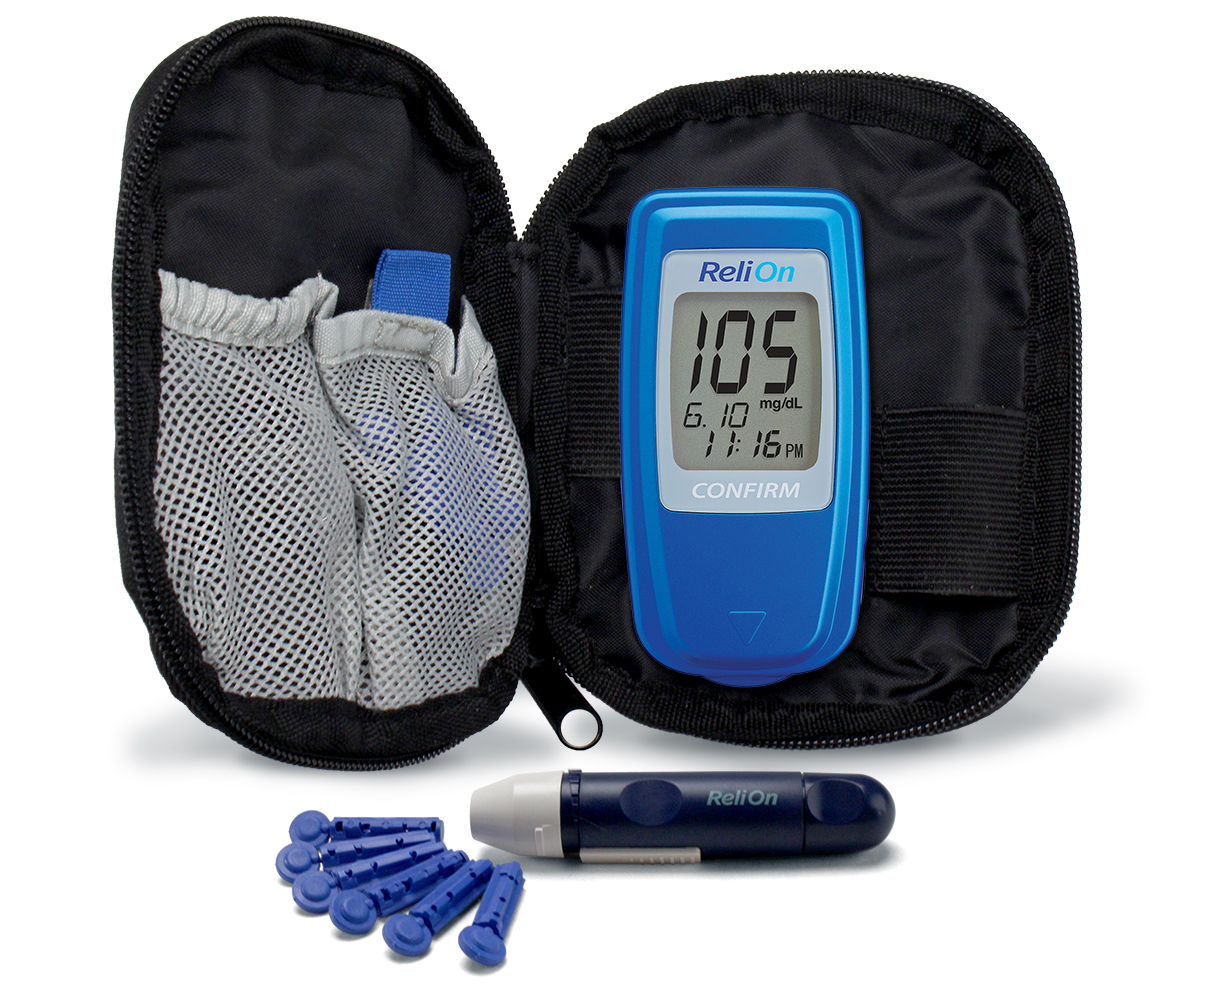 ReliOn Confirm Blood Glucose Monitor, Blue - image 5 of 8